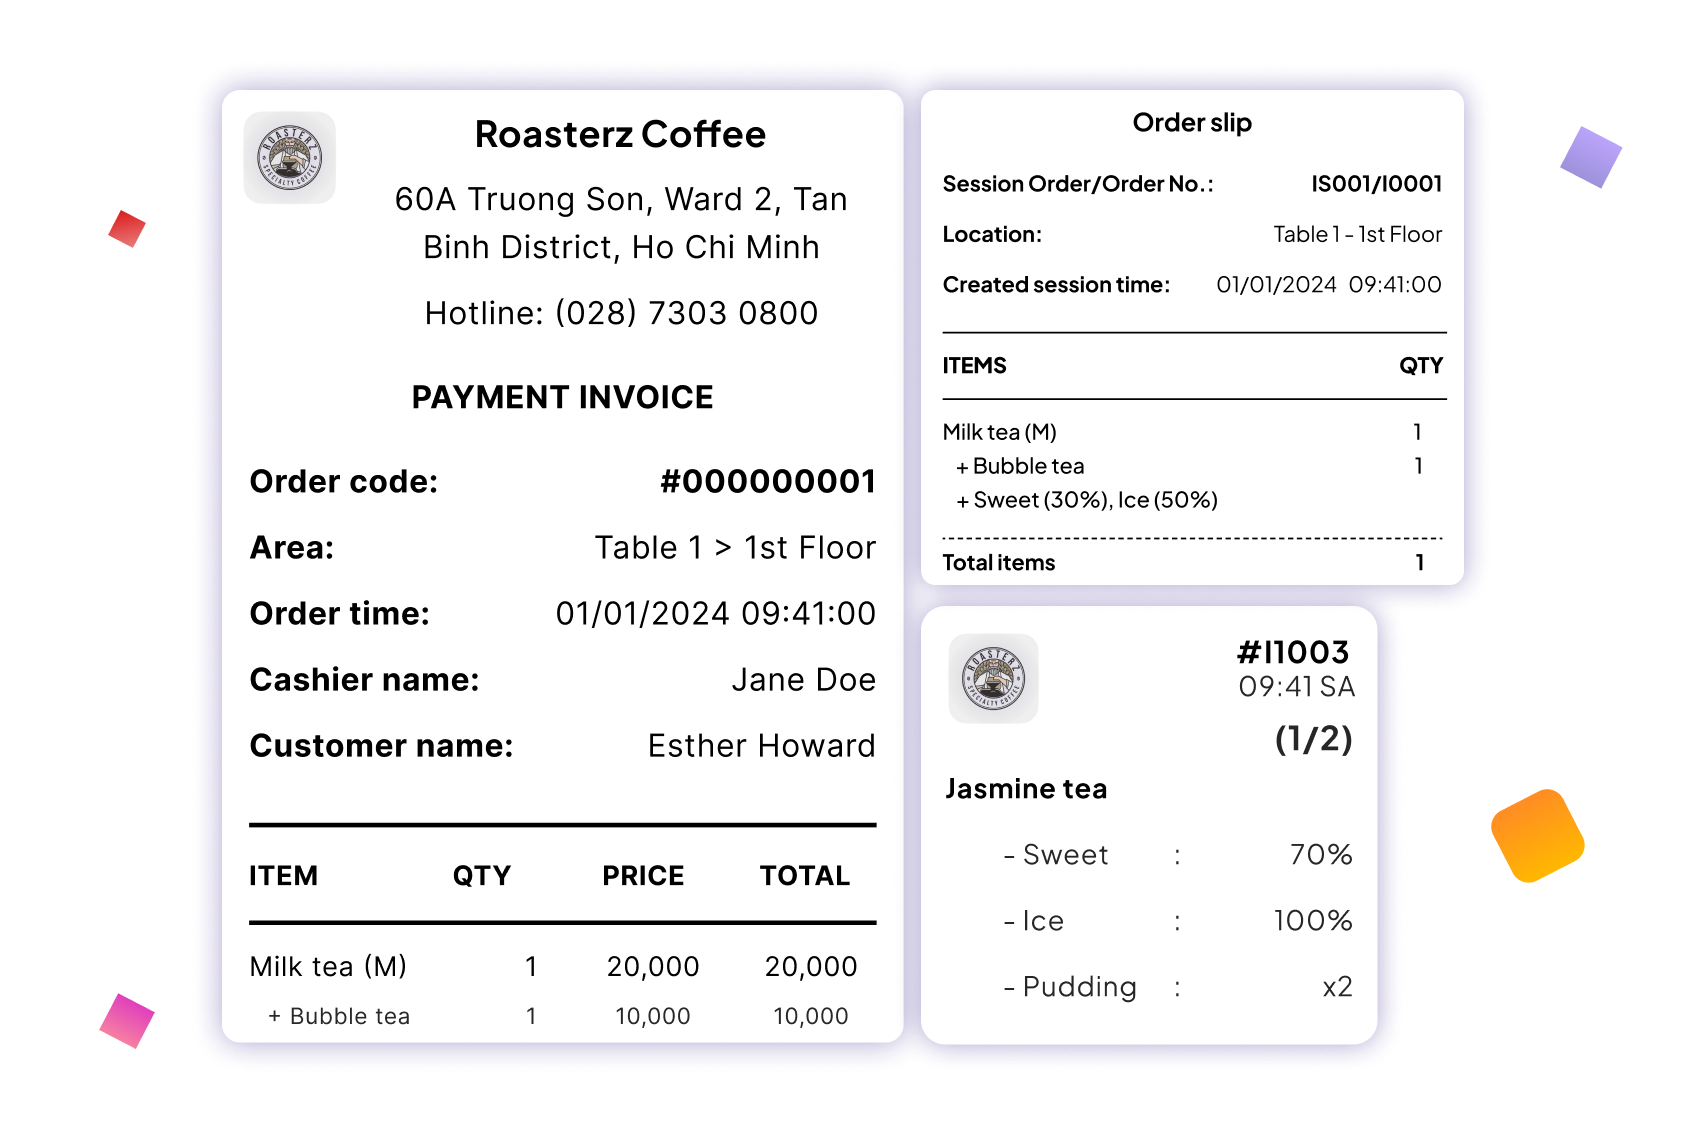 Management of invoices, labels, and order tickets